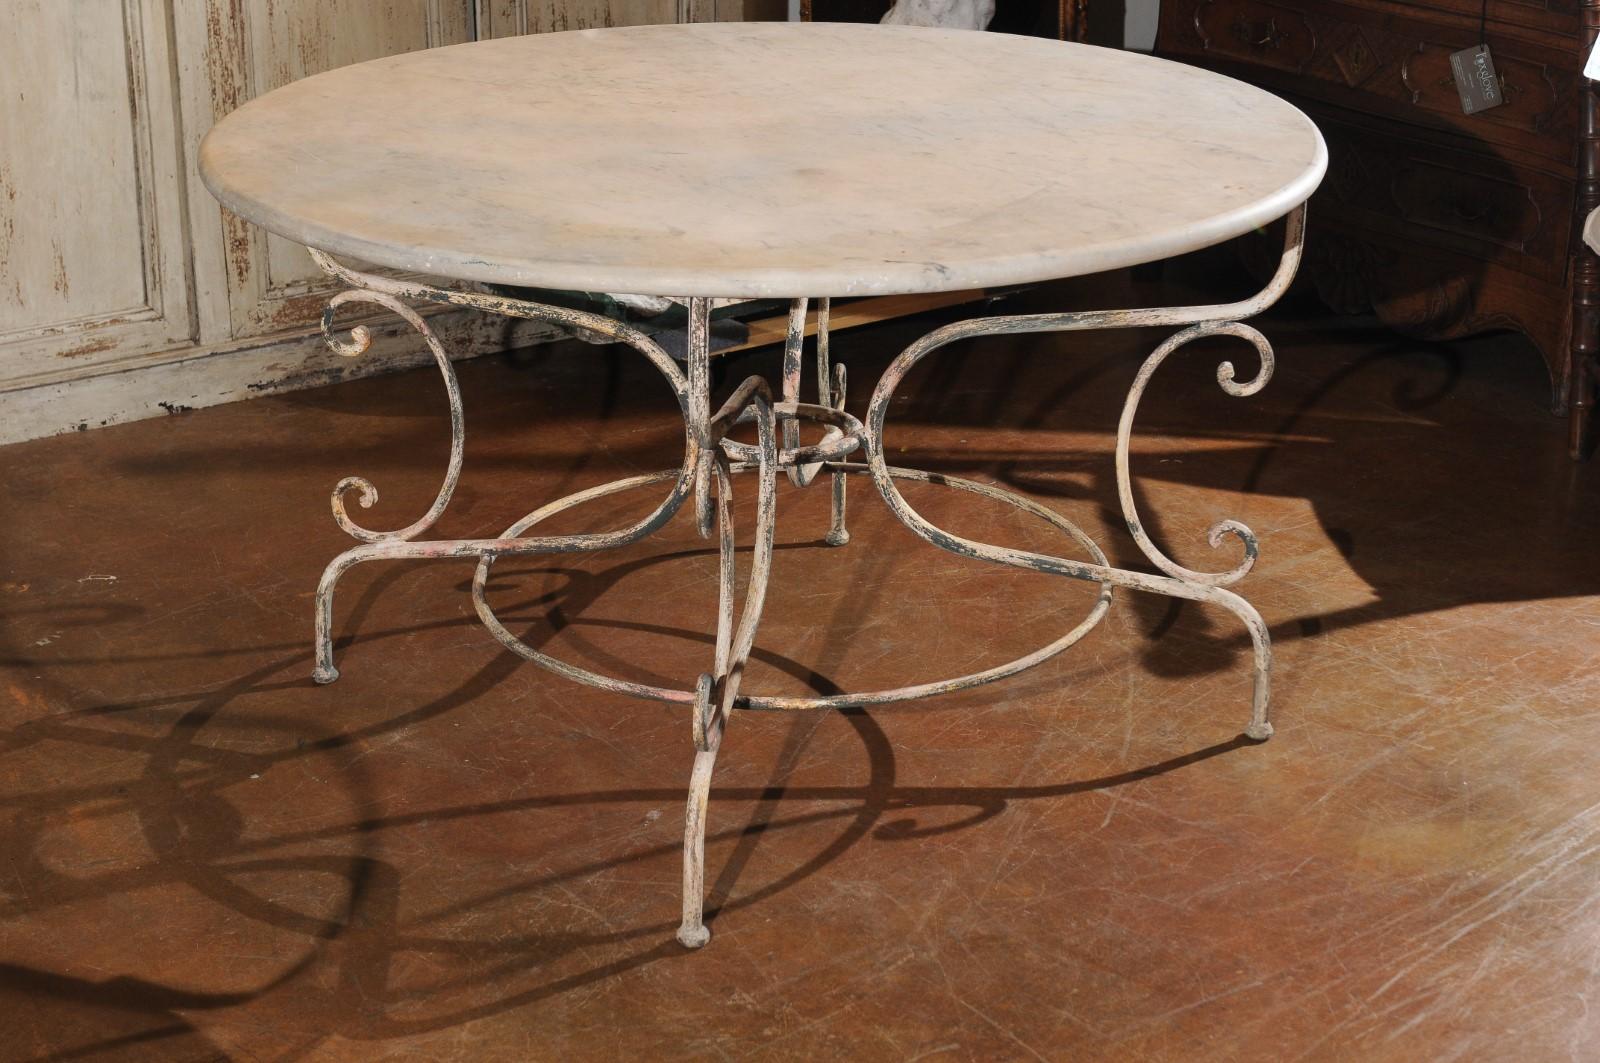 A vintage French painted iron garden table from the mid-20th century, with marble top and scrolling base. Born in France during the midcentury period, this charming garden table features a circular veined marble top sitting above a scrolling base